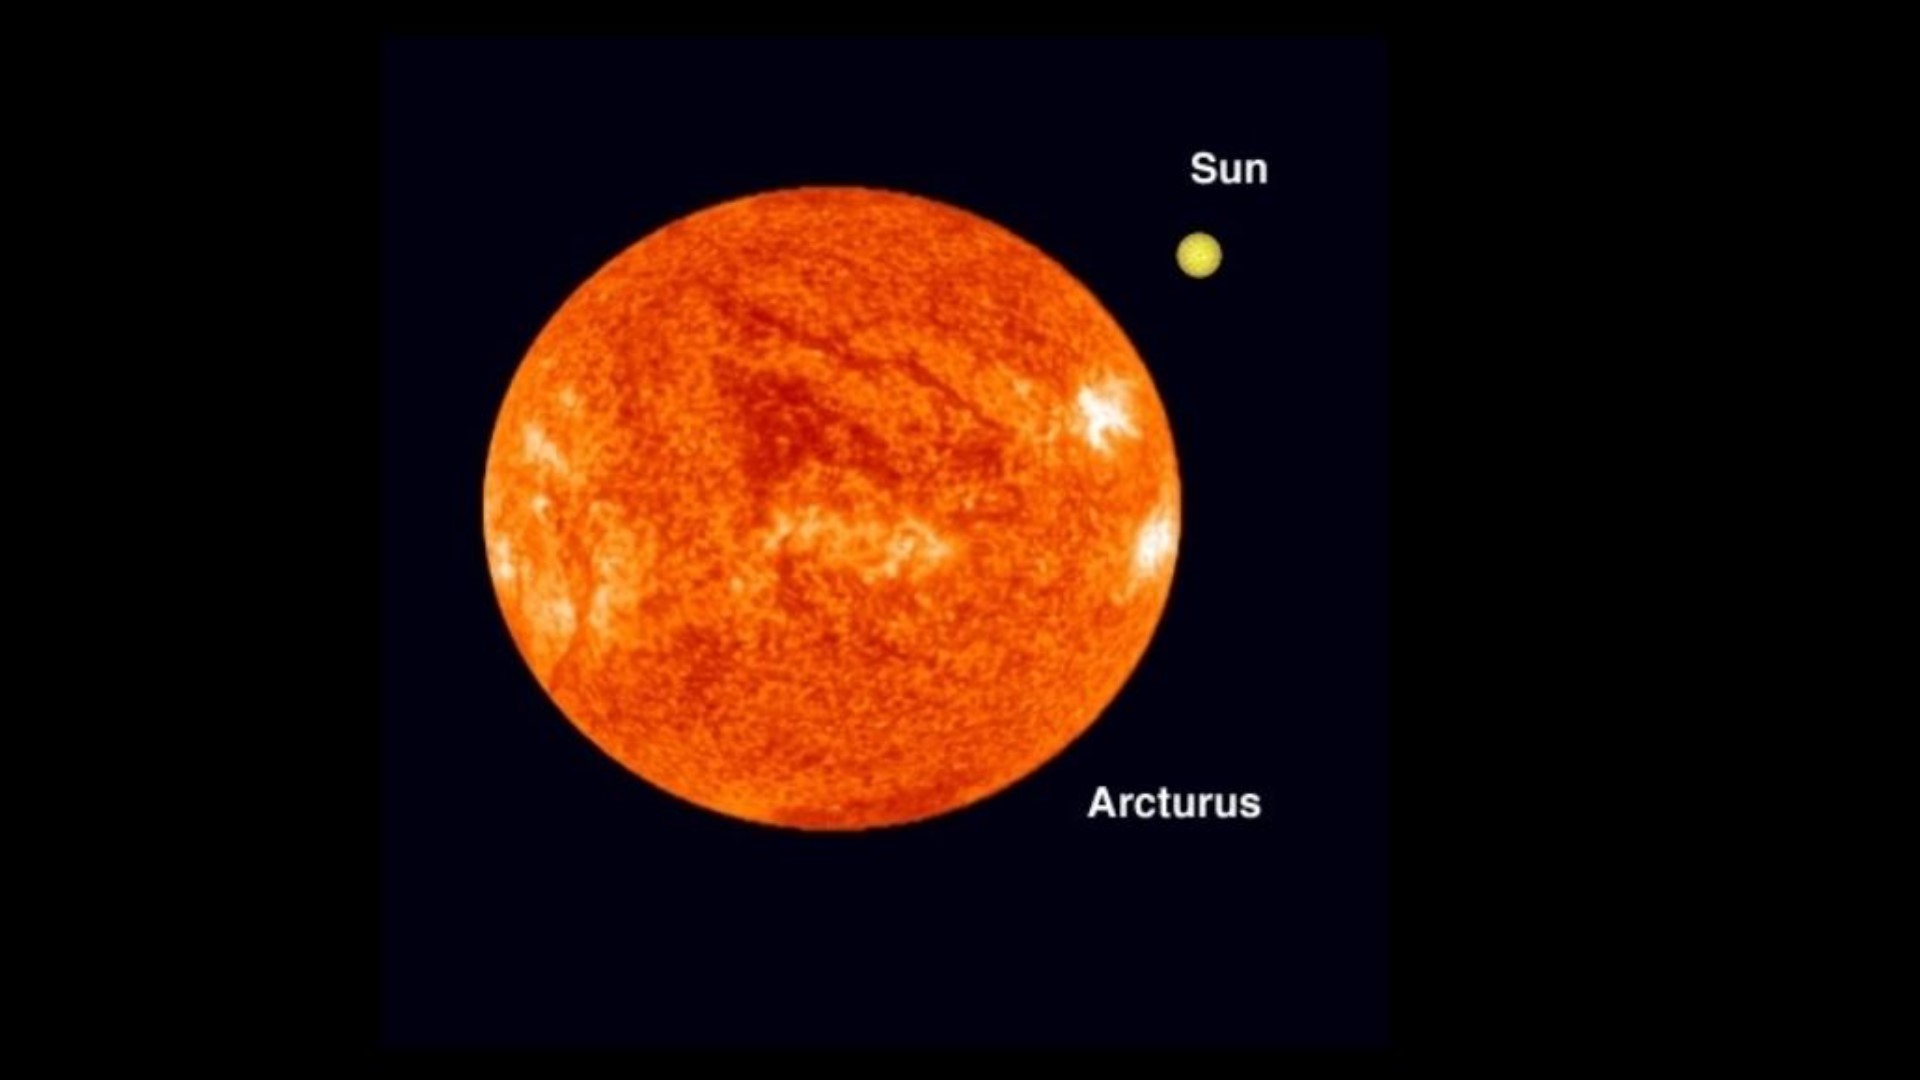 Arcturus, the fourth brightest star in the night sky, is called the "Ghost of the Summer Sun" because it mimics the summer sun.